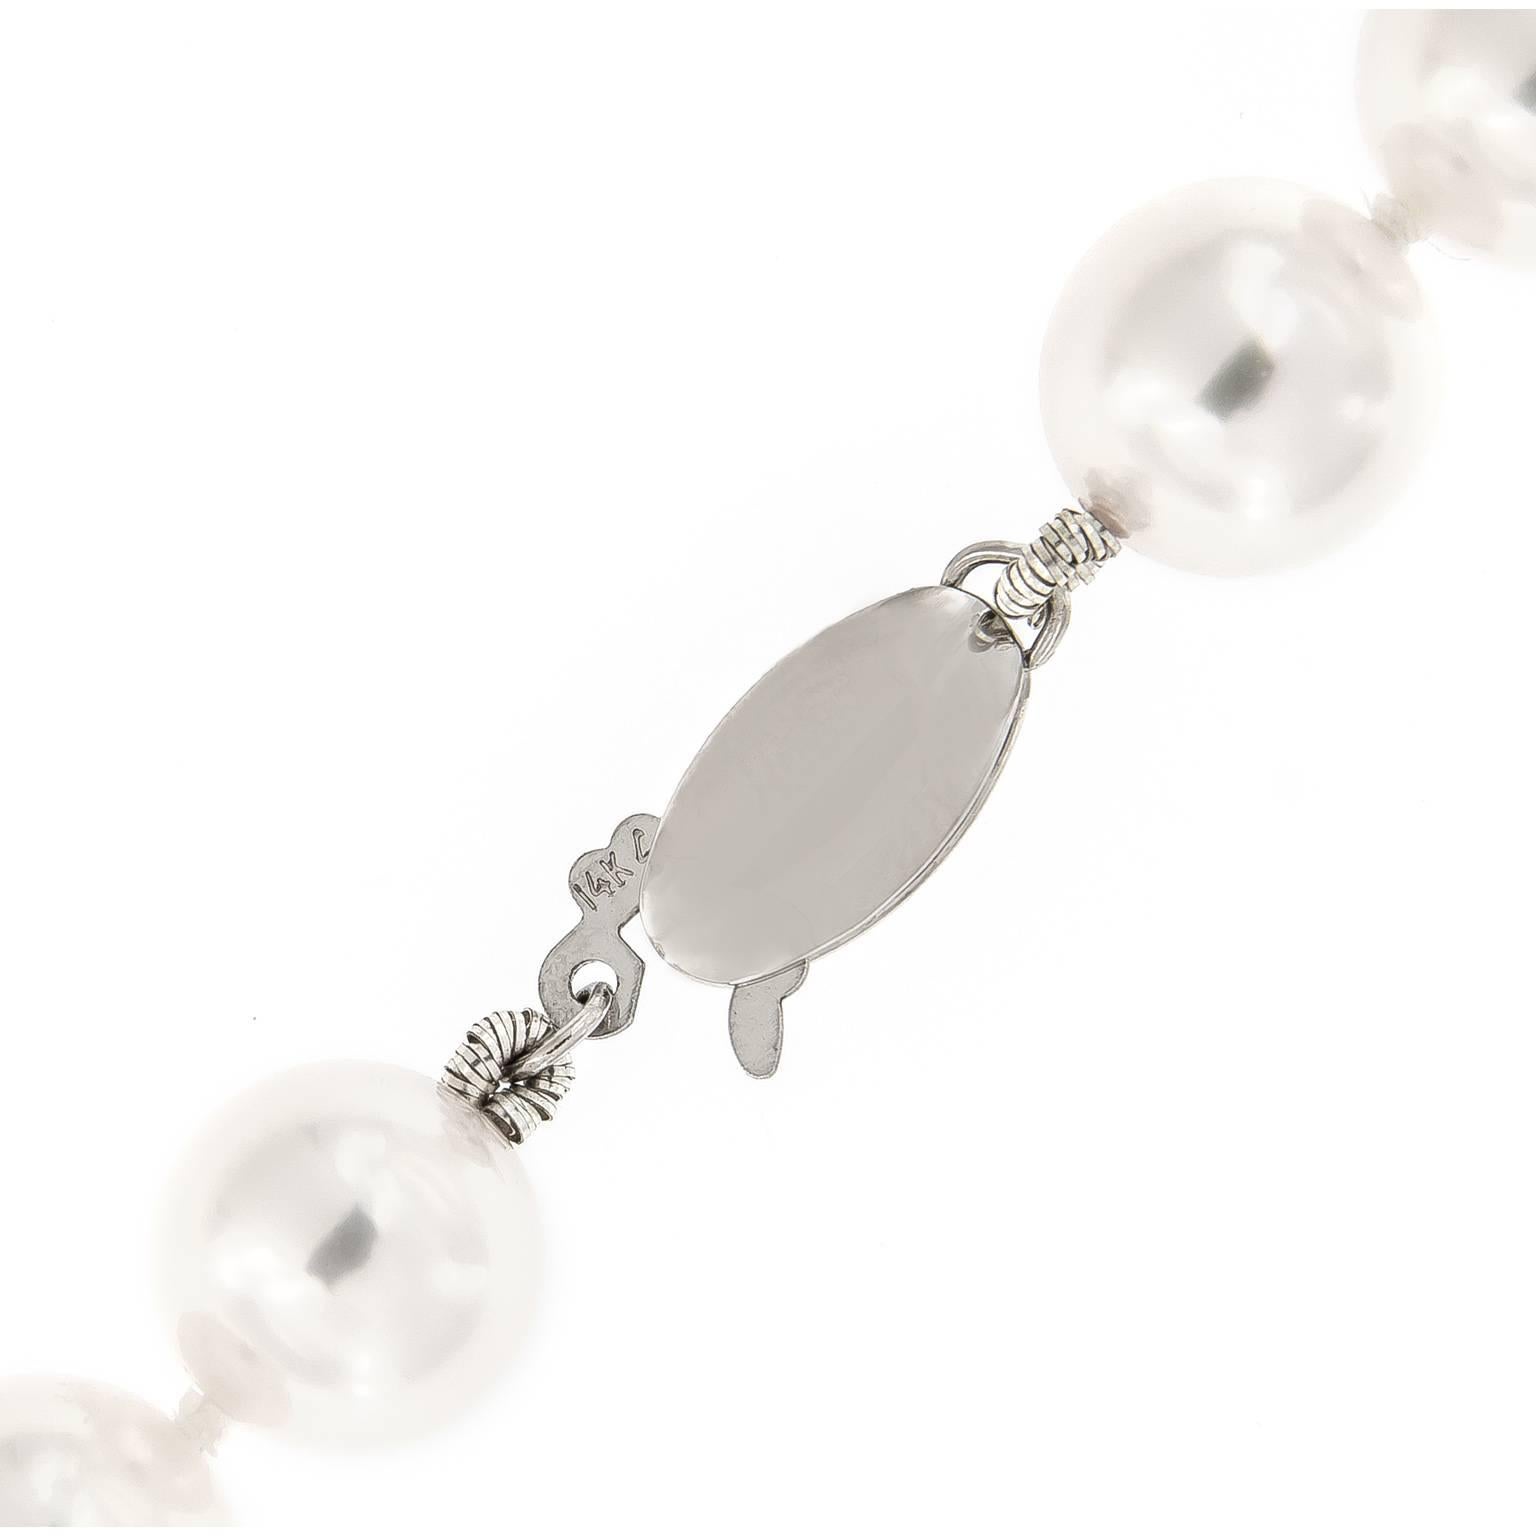 A pearl necklace is a gift of romance and is a sign of eternal love. This necklace features 48 8.5 mm-9 mm Akoya cultured pearls with a oval 14 white gold clasp. Akoya pearls are exquisite, classic pearls coming directly from Japan. They are known